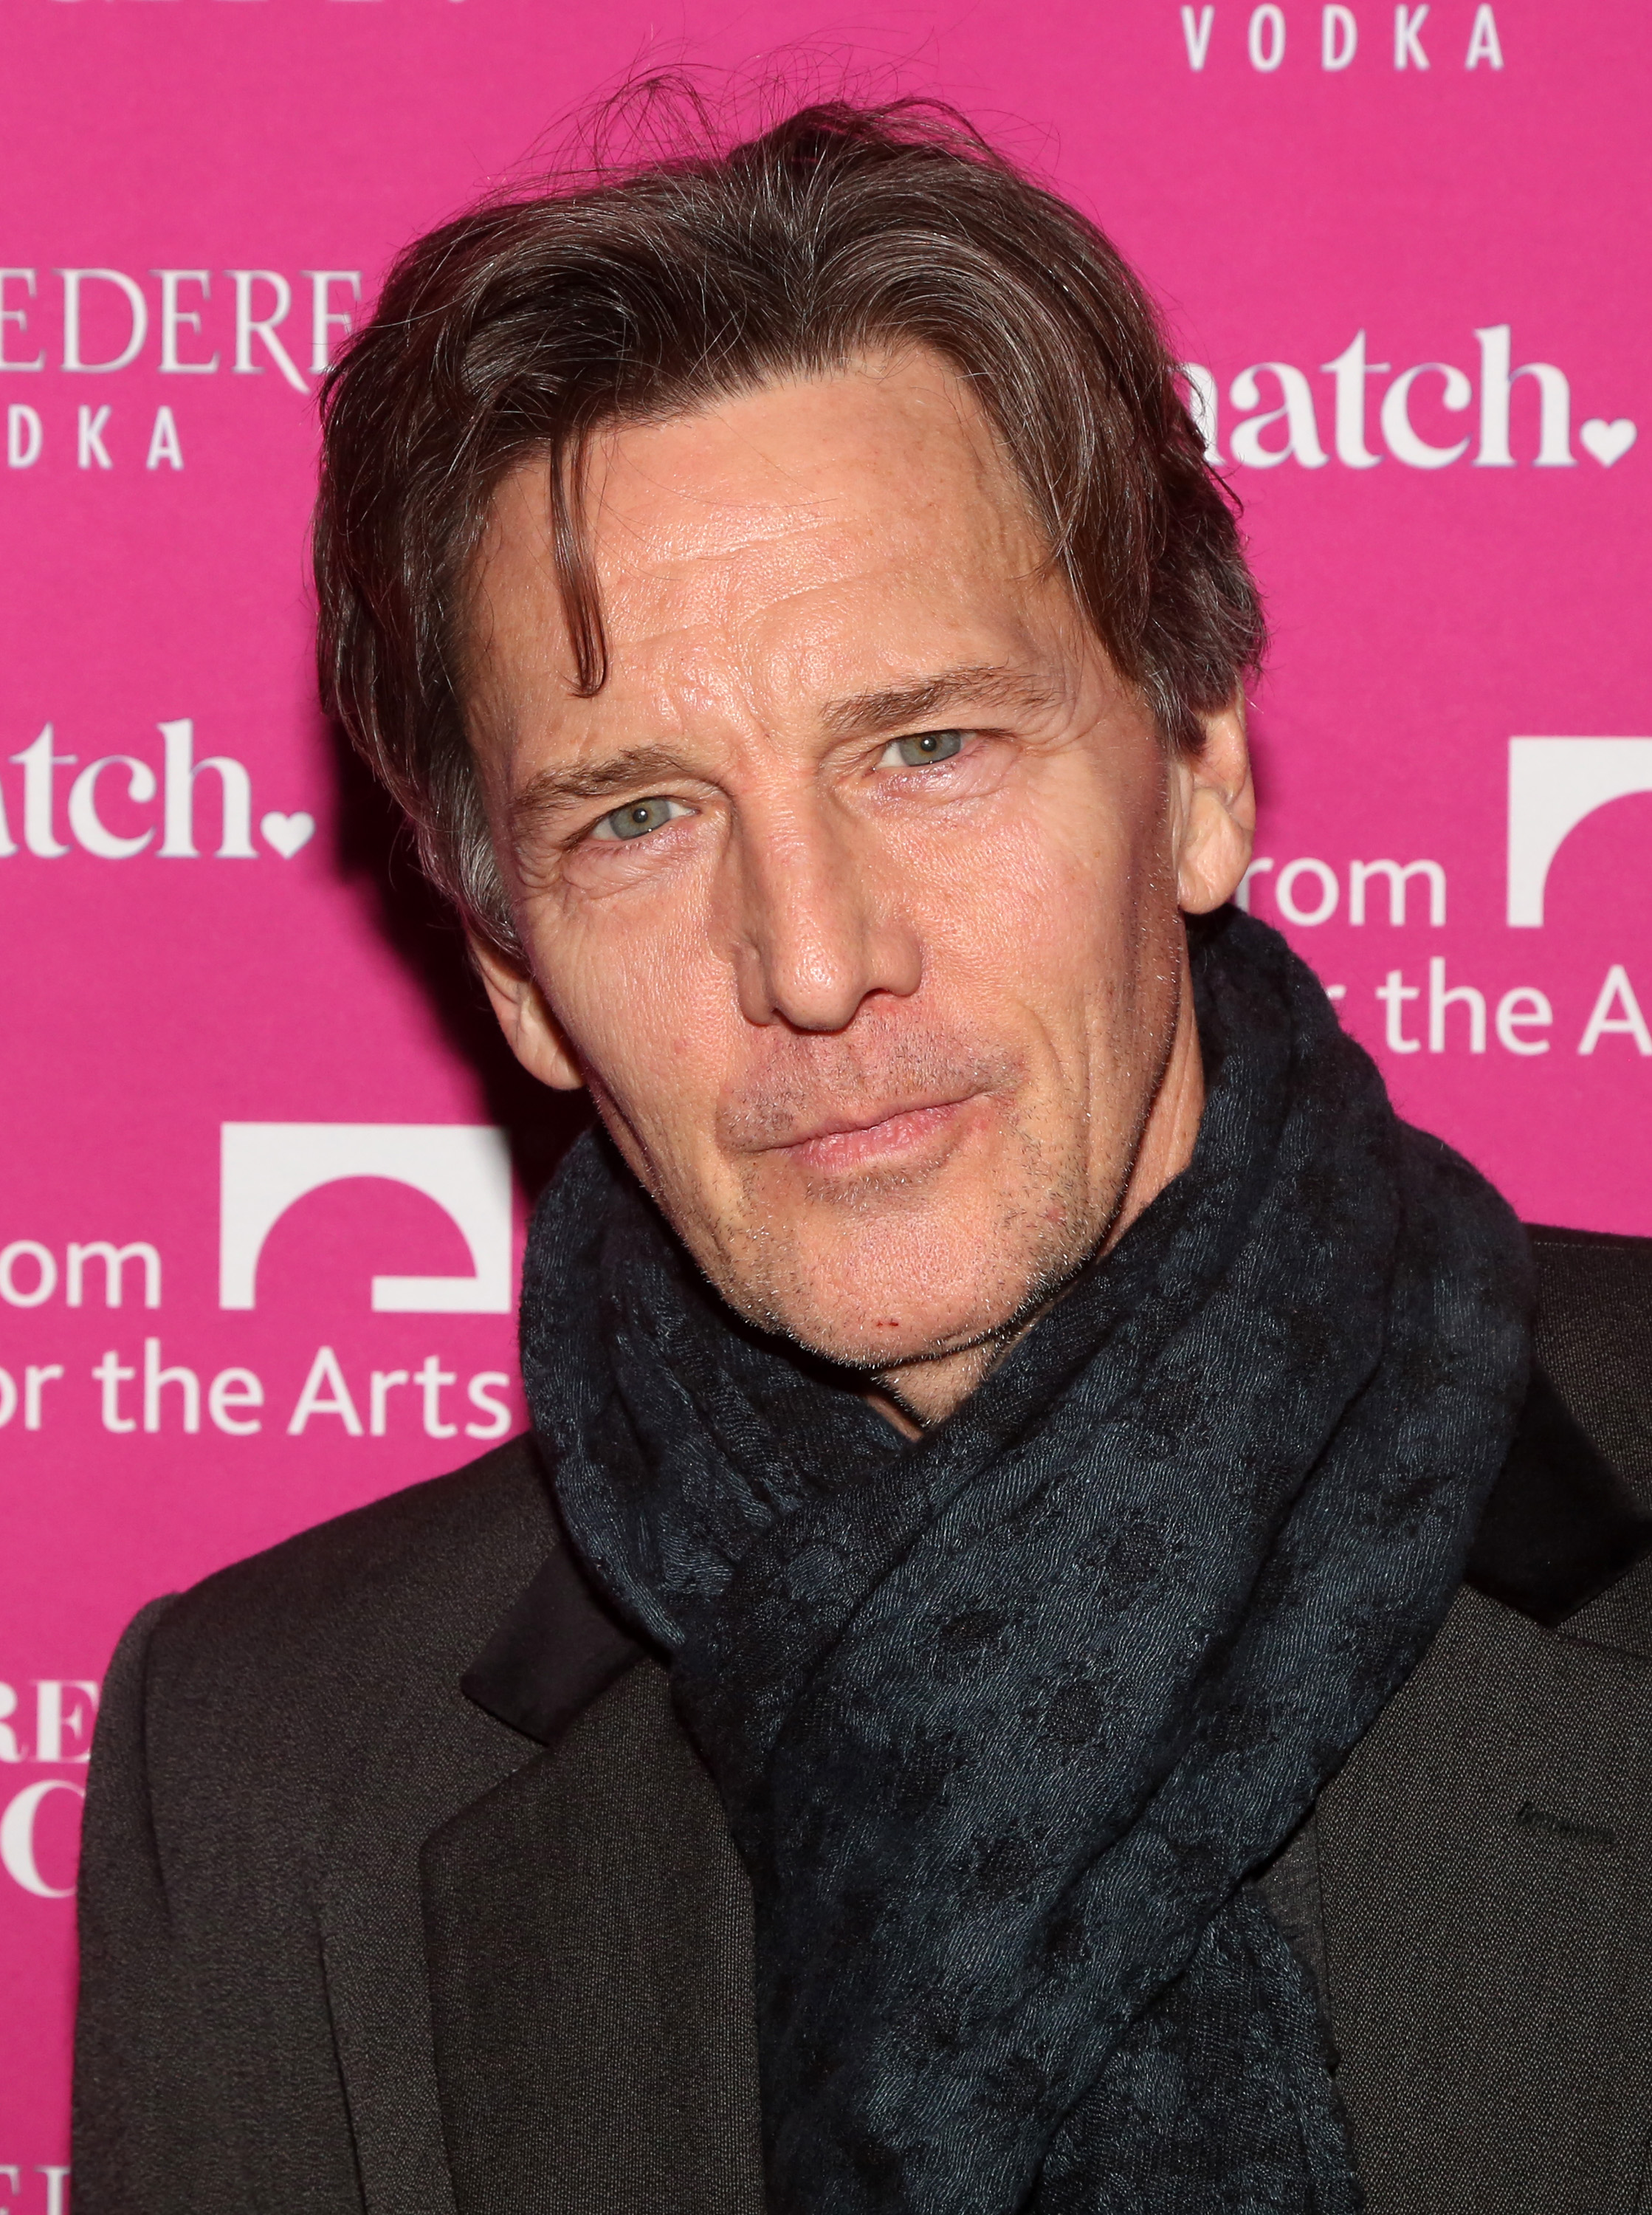 Andrew McCarthy attends an event in New York on December 7, 2021 | Source: Getty Images